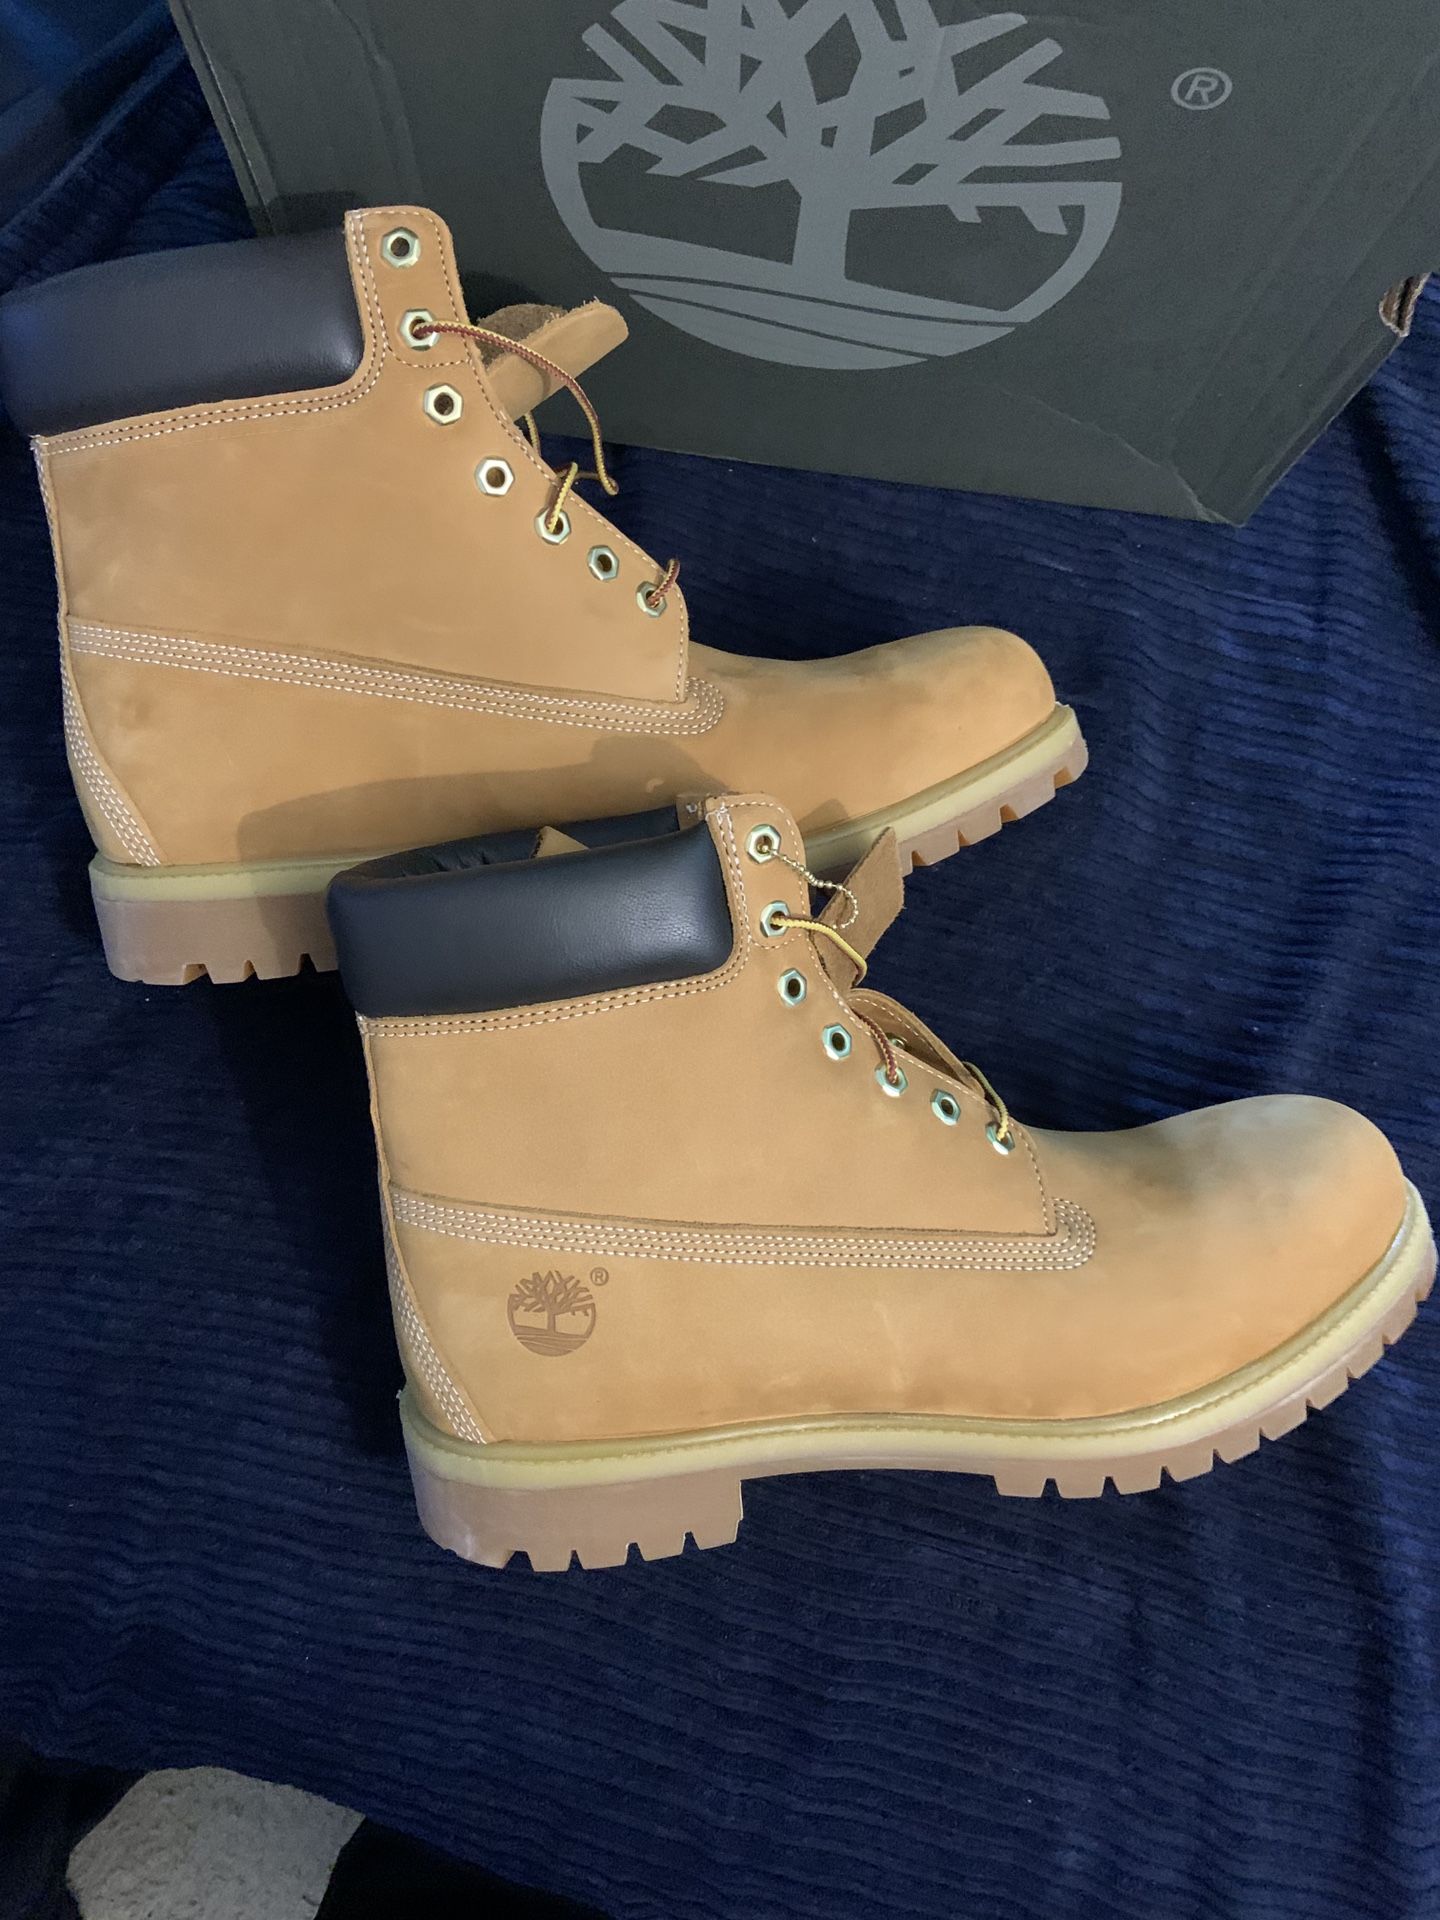 Timberlands size 13 brand new come in the original box